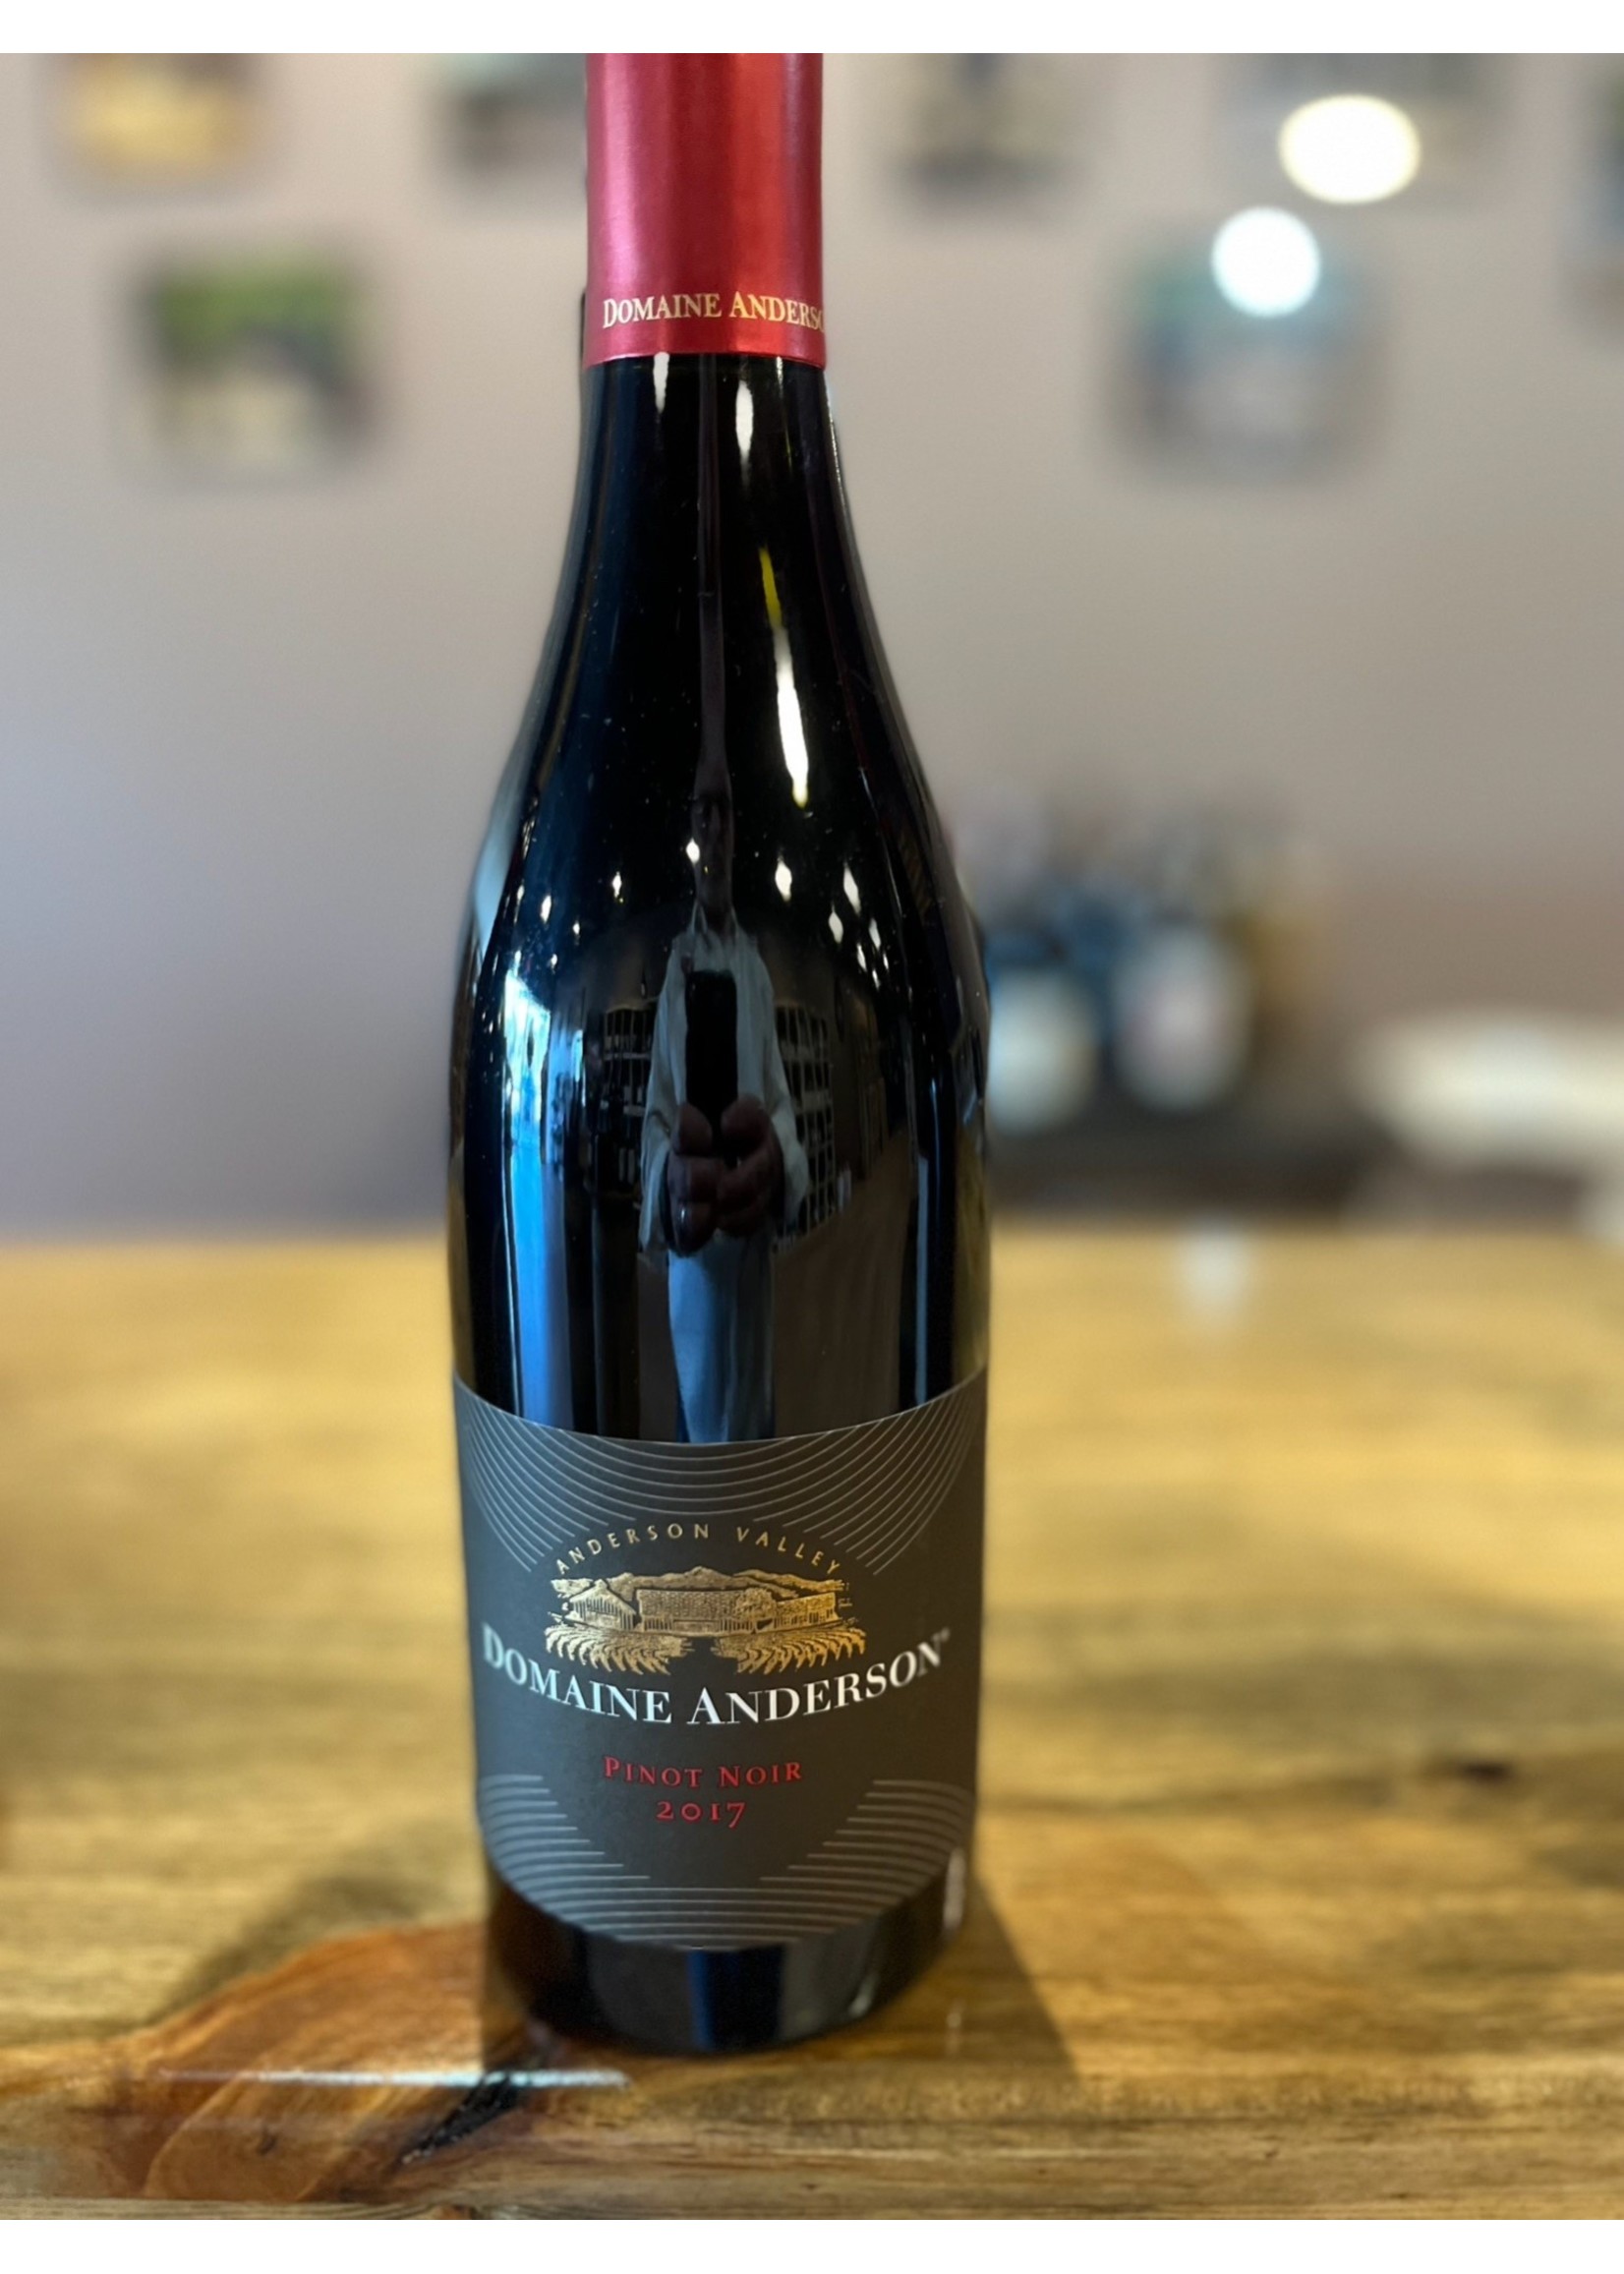 Domaine Anderson Pinot Noir 2017